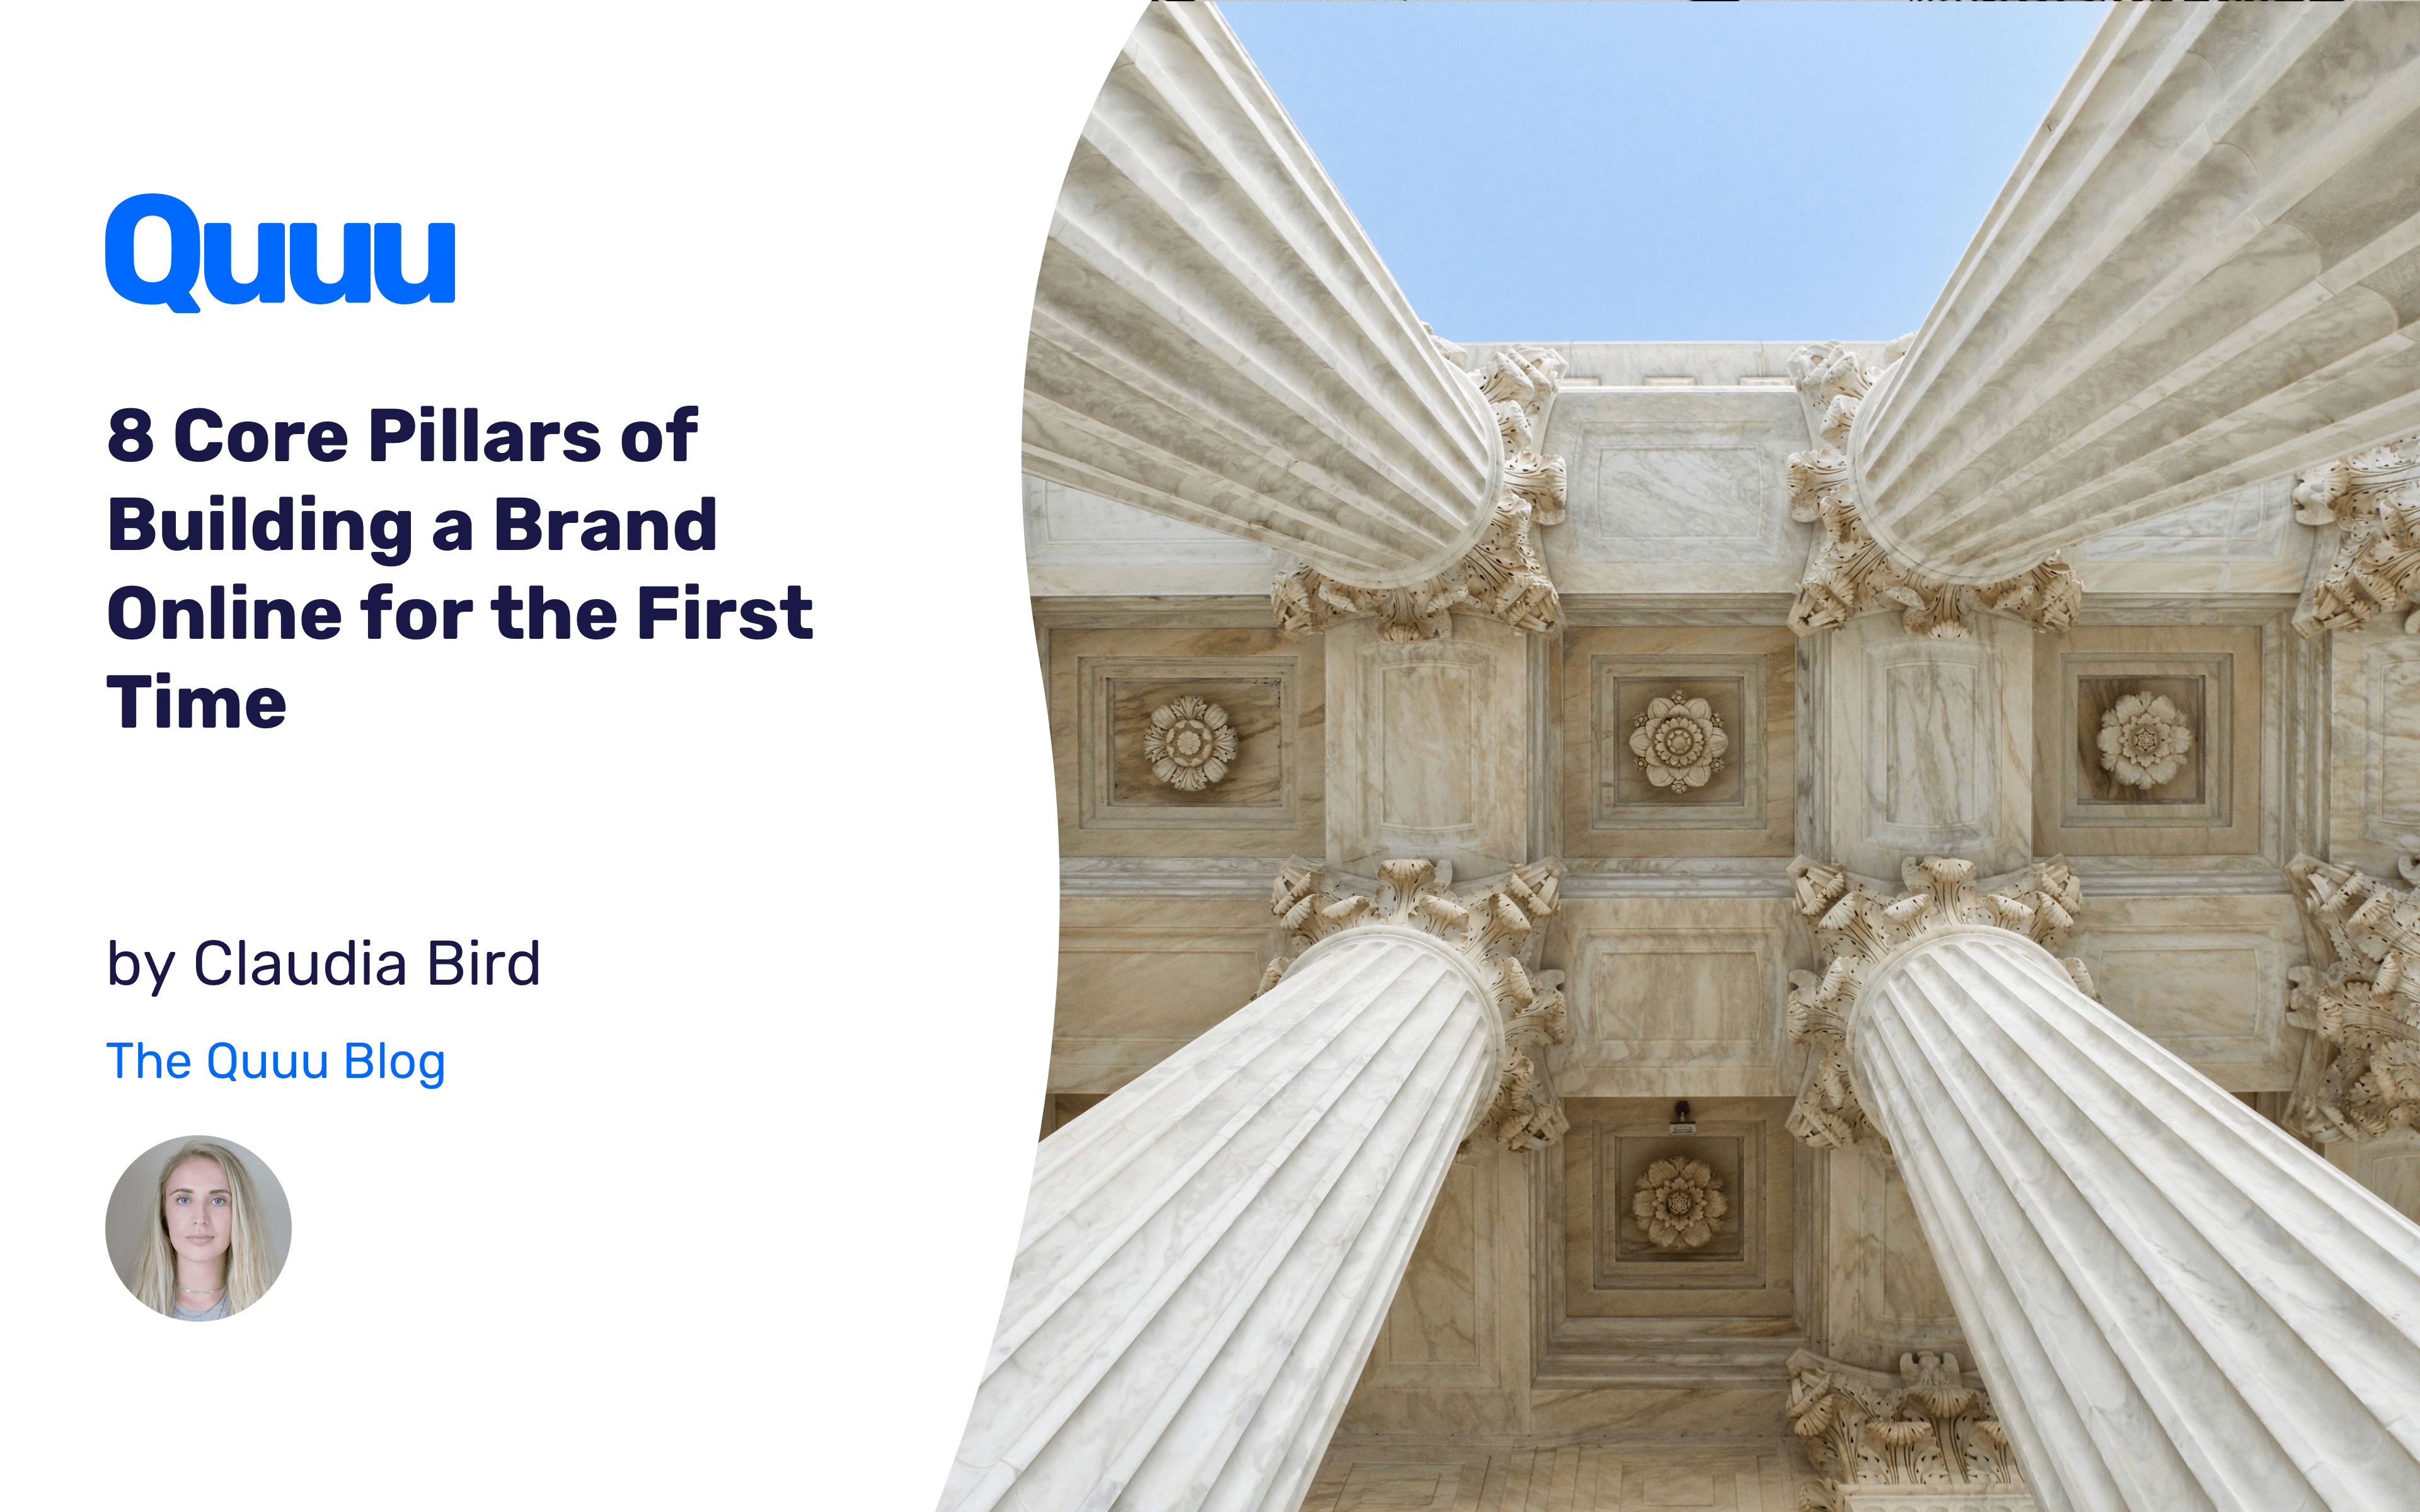 8 Core Pillars of Building a Brand Online for the First Time